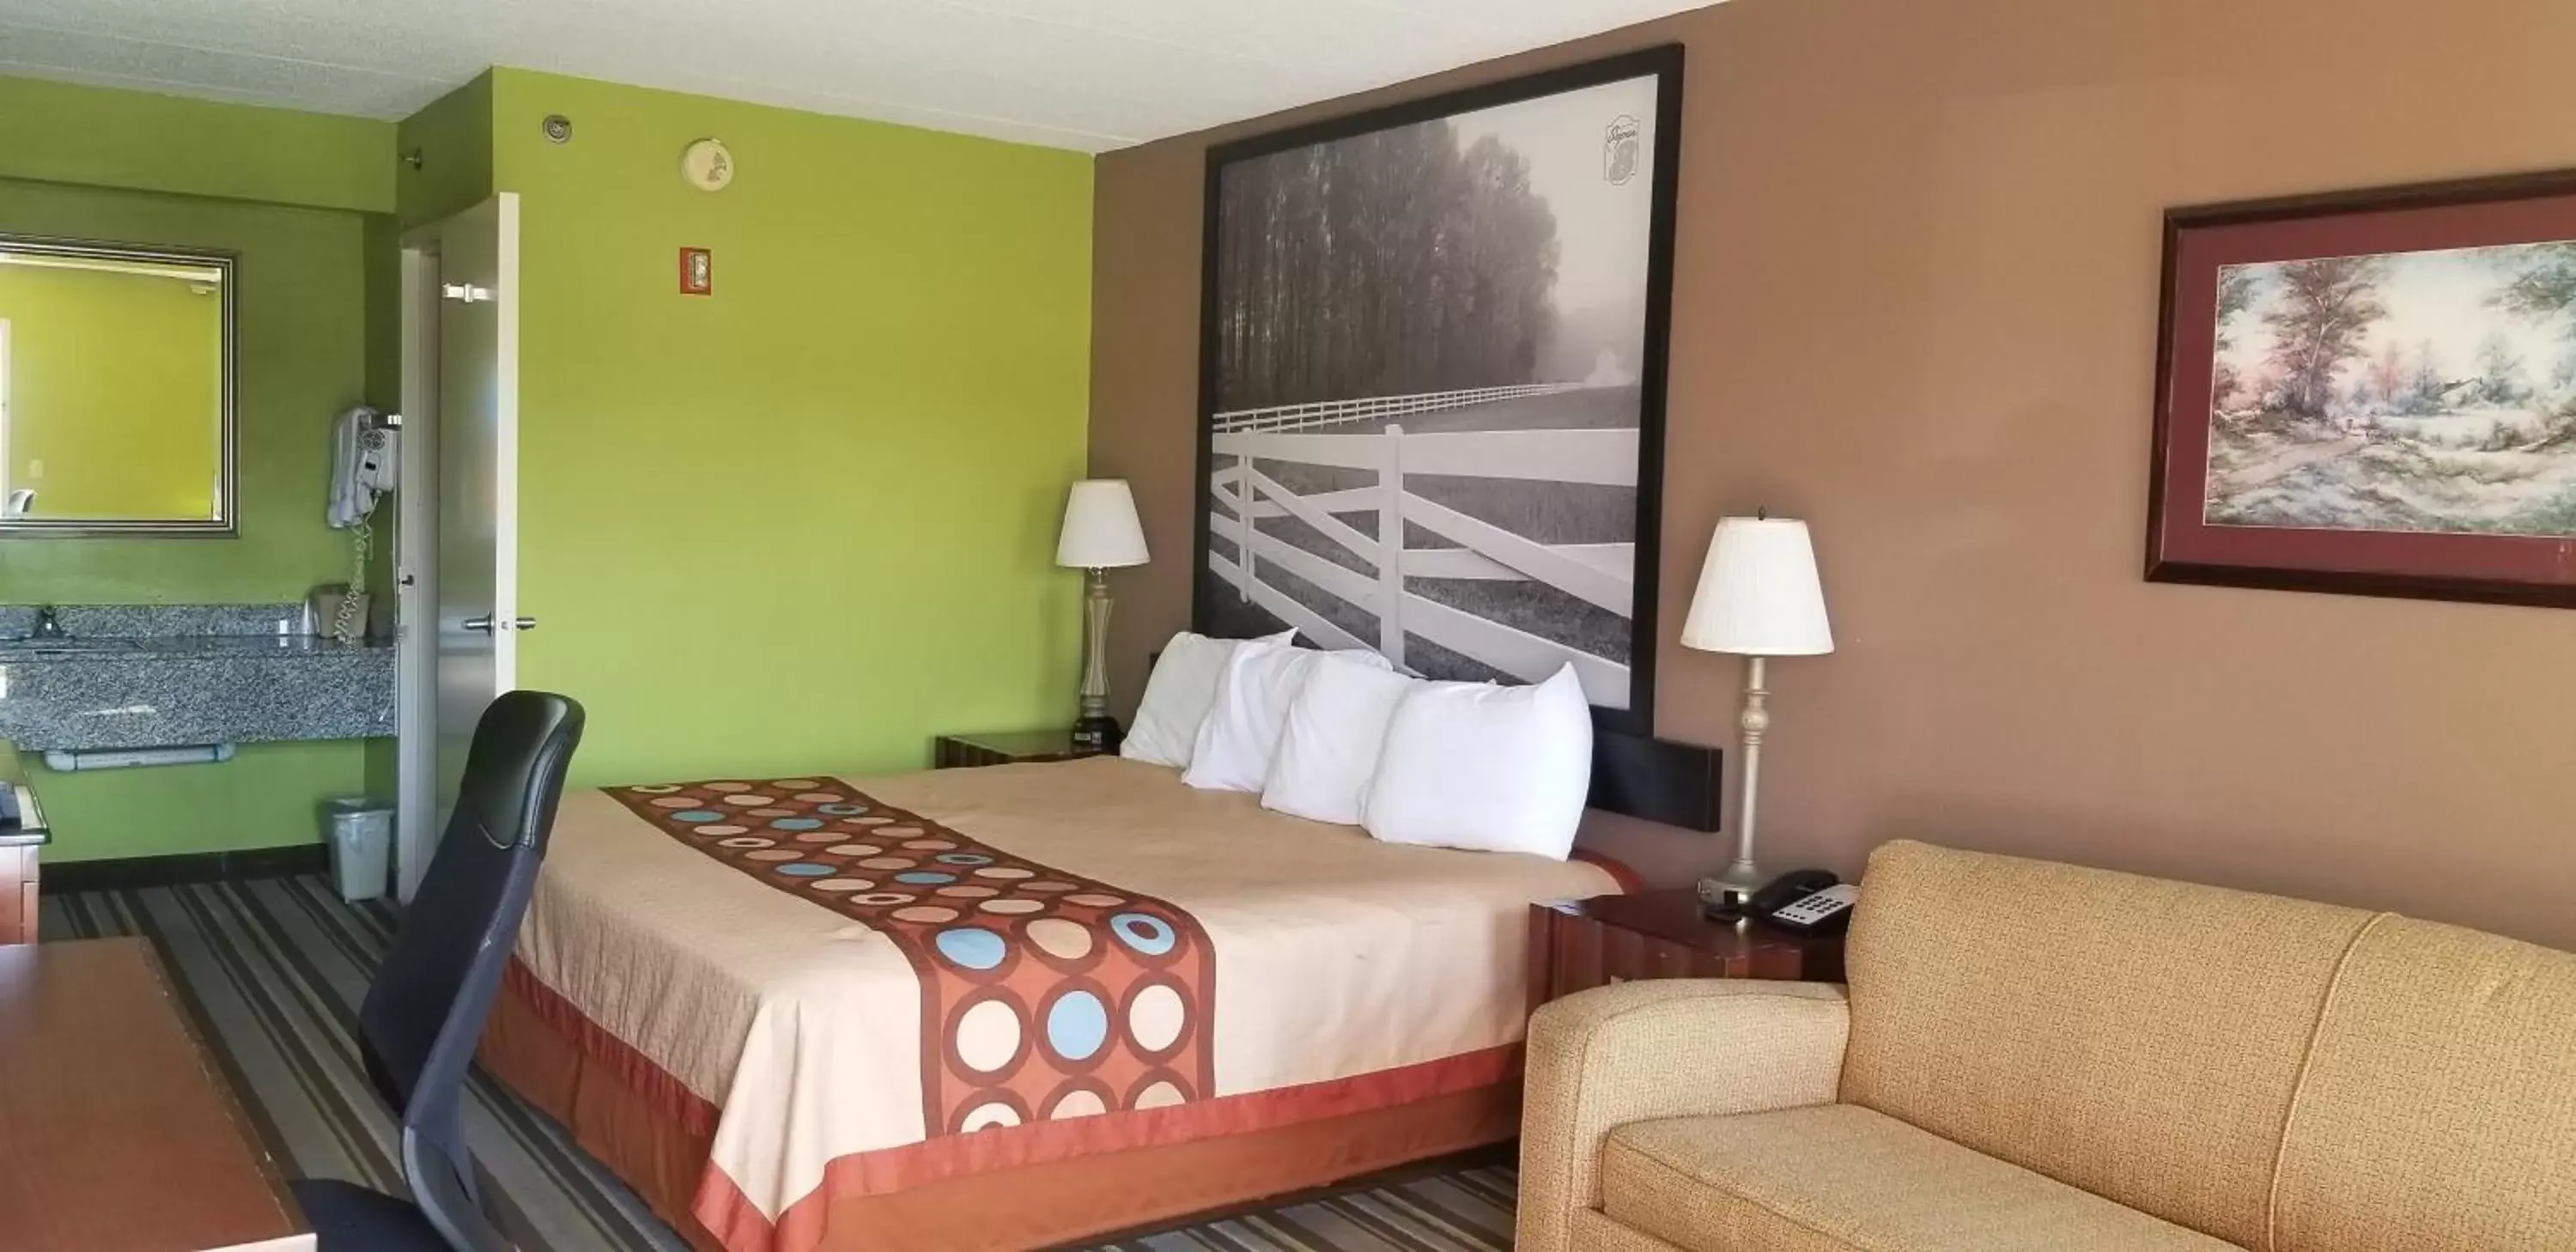 Bed in Super 8 by Wyndham Ruther Glen Kings Dominion Area